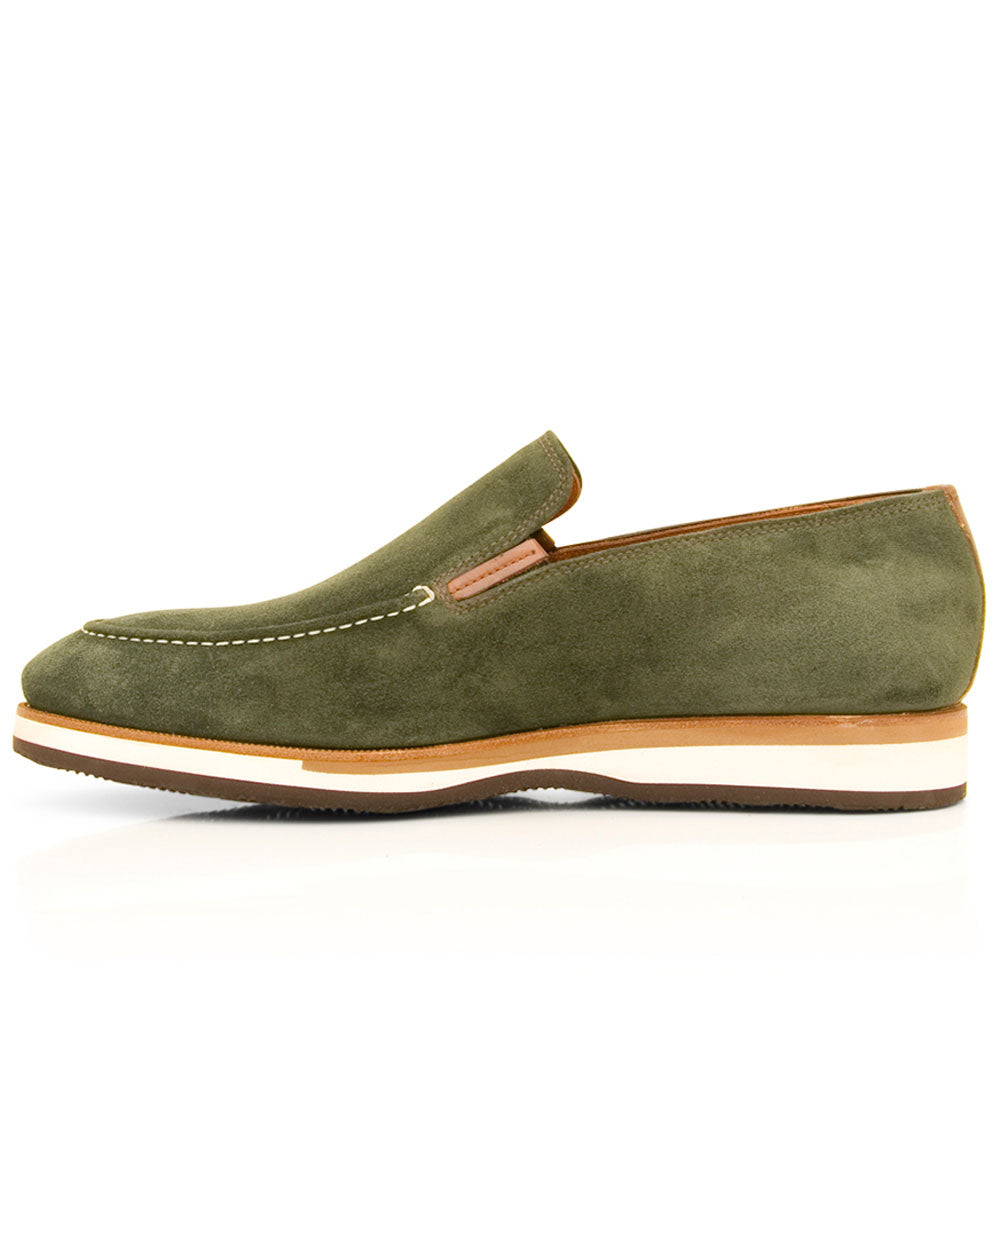 Passeggio Suede Loafer in Military Green